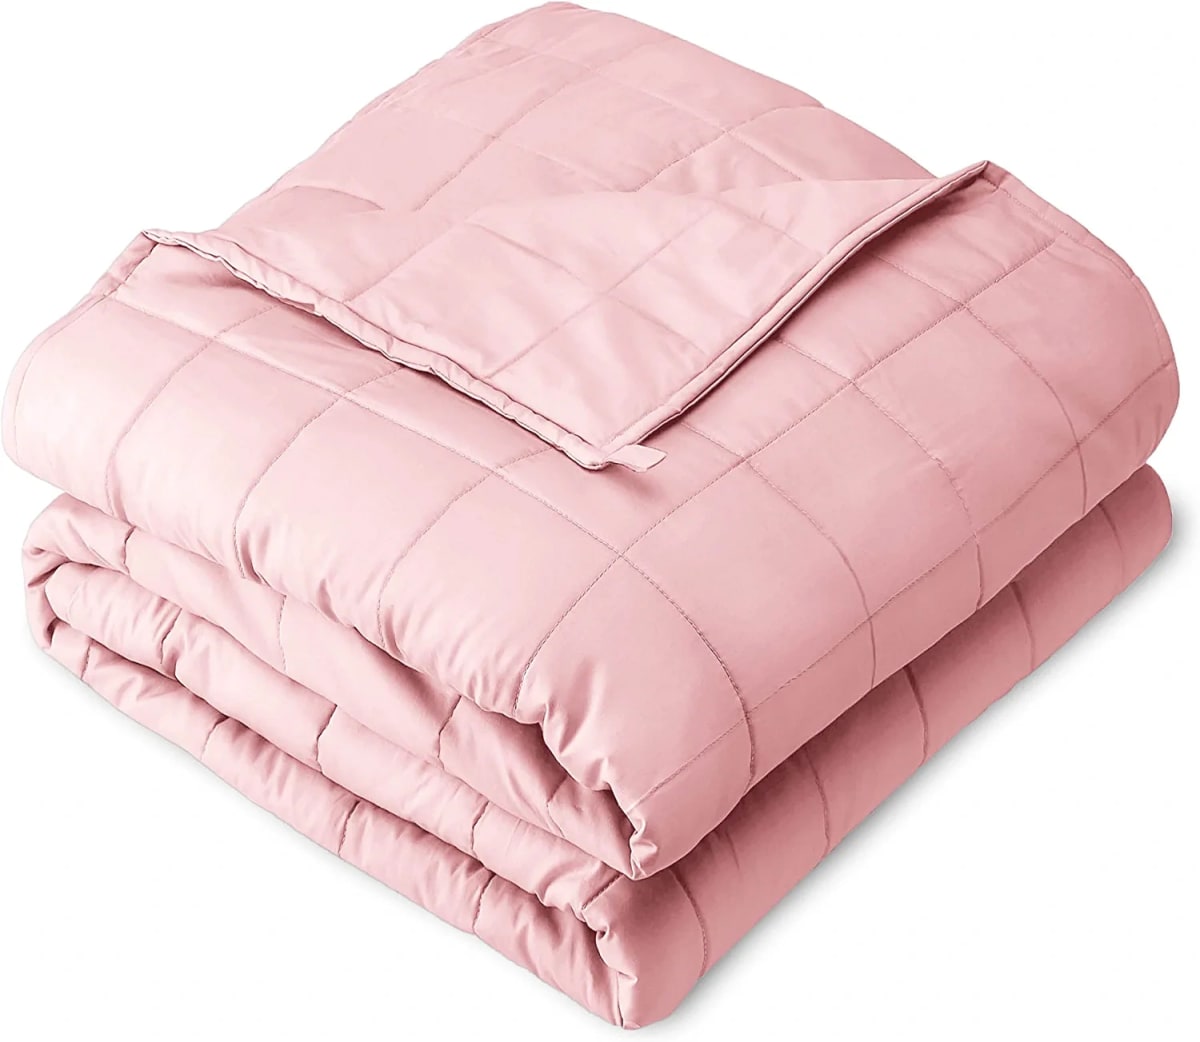 Weighted Blanket Twin blanket